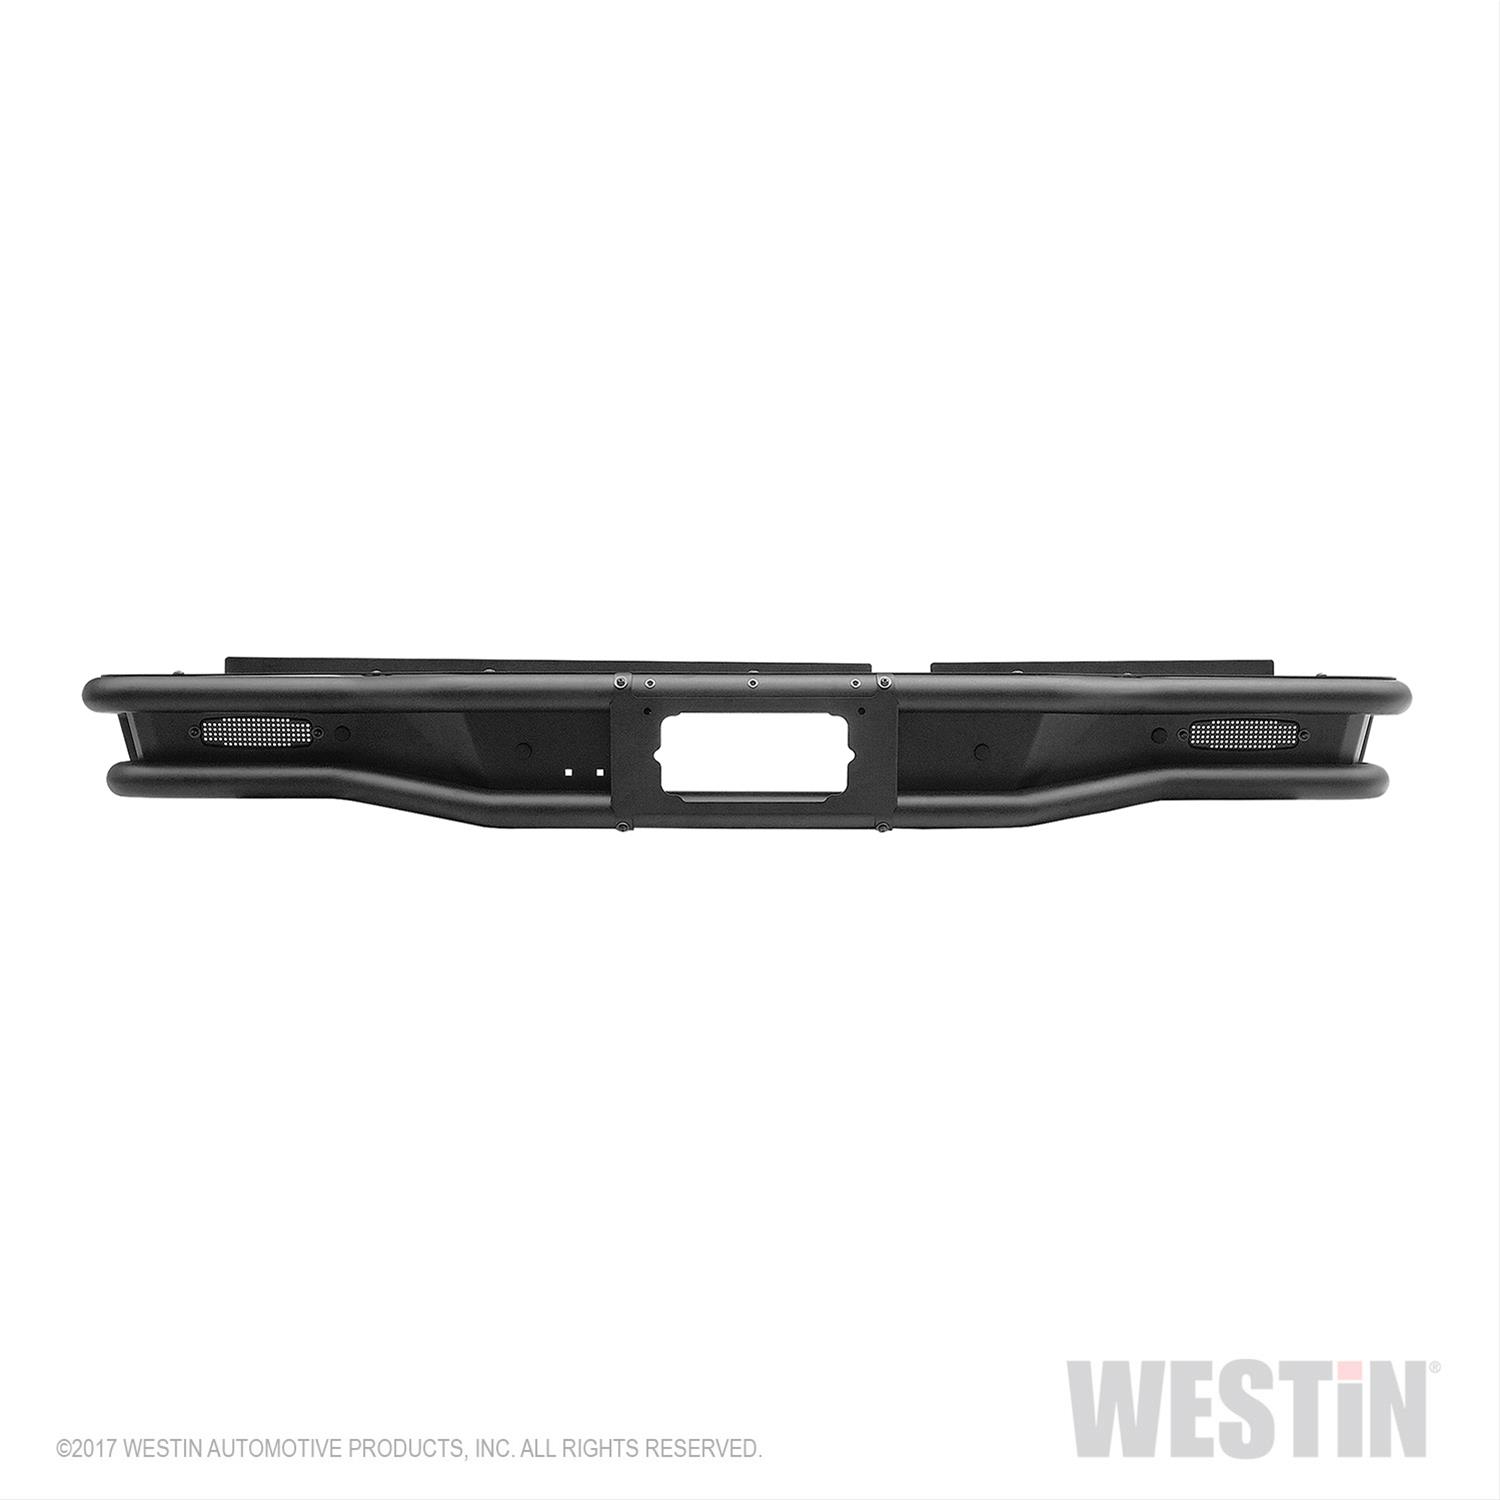 Westin Outlaw Rear Truck Bumper 2009-18 Dodge Ram - Click Image to Close